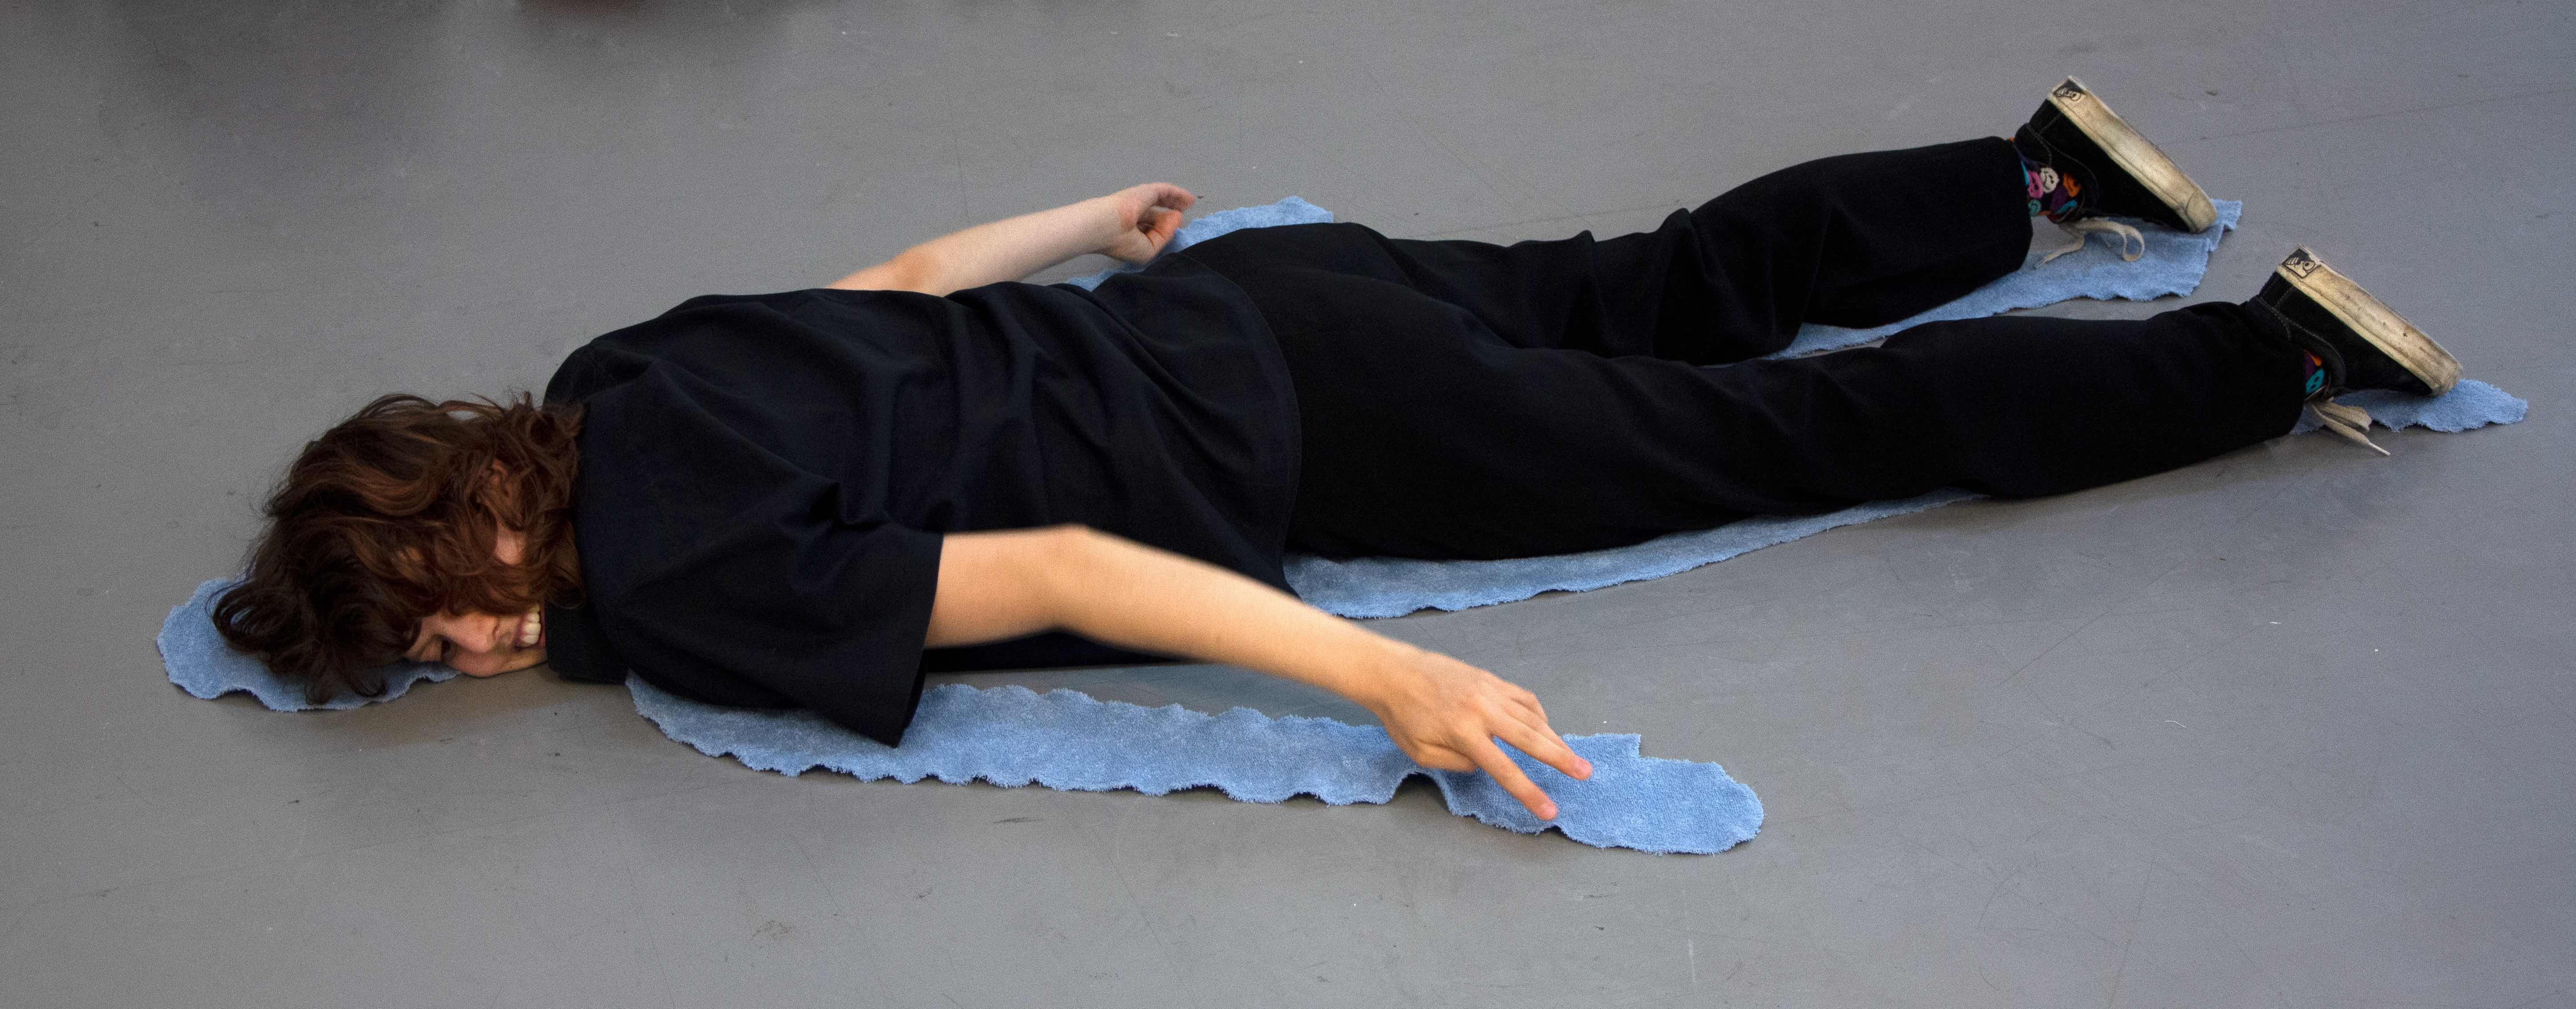 Towel in the shape of a human body on the floor. On top lays the artist, hugging the towel in a humorous  manner.